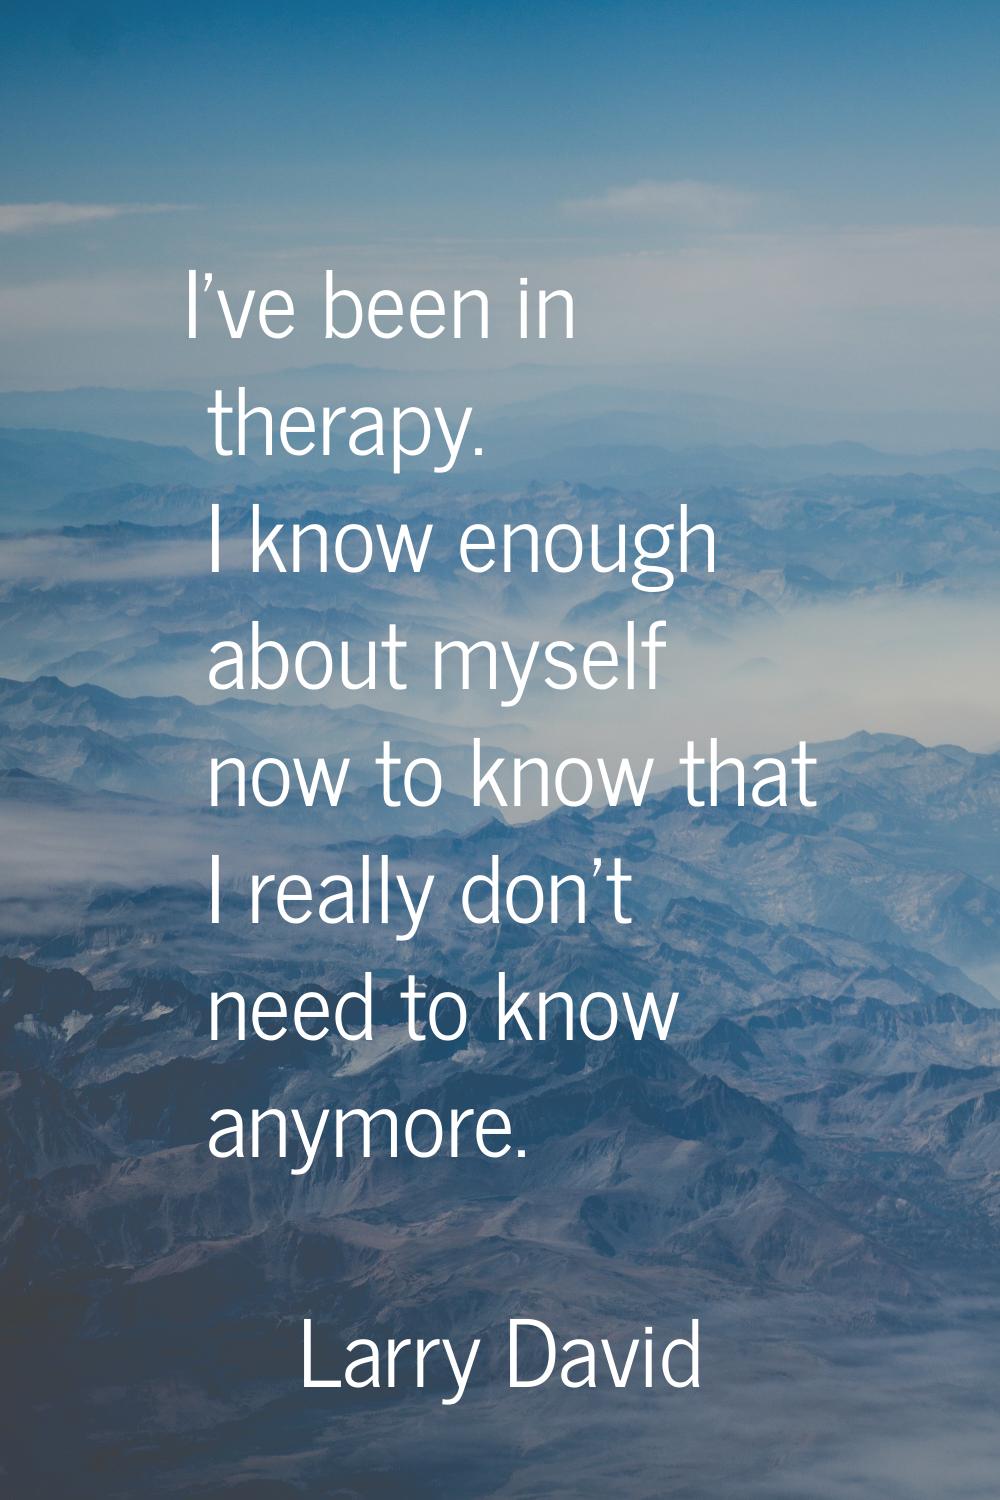 I've been in therapy. I know enough about myself now to know that I really don't need to know anymo